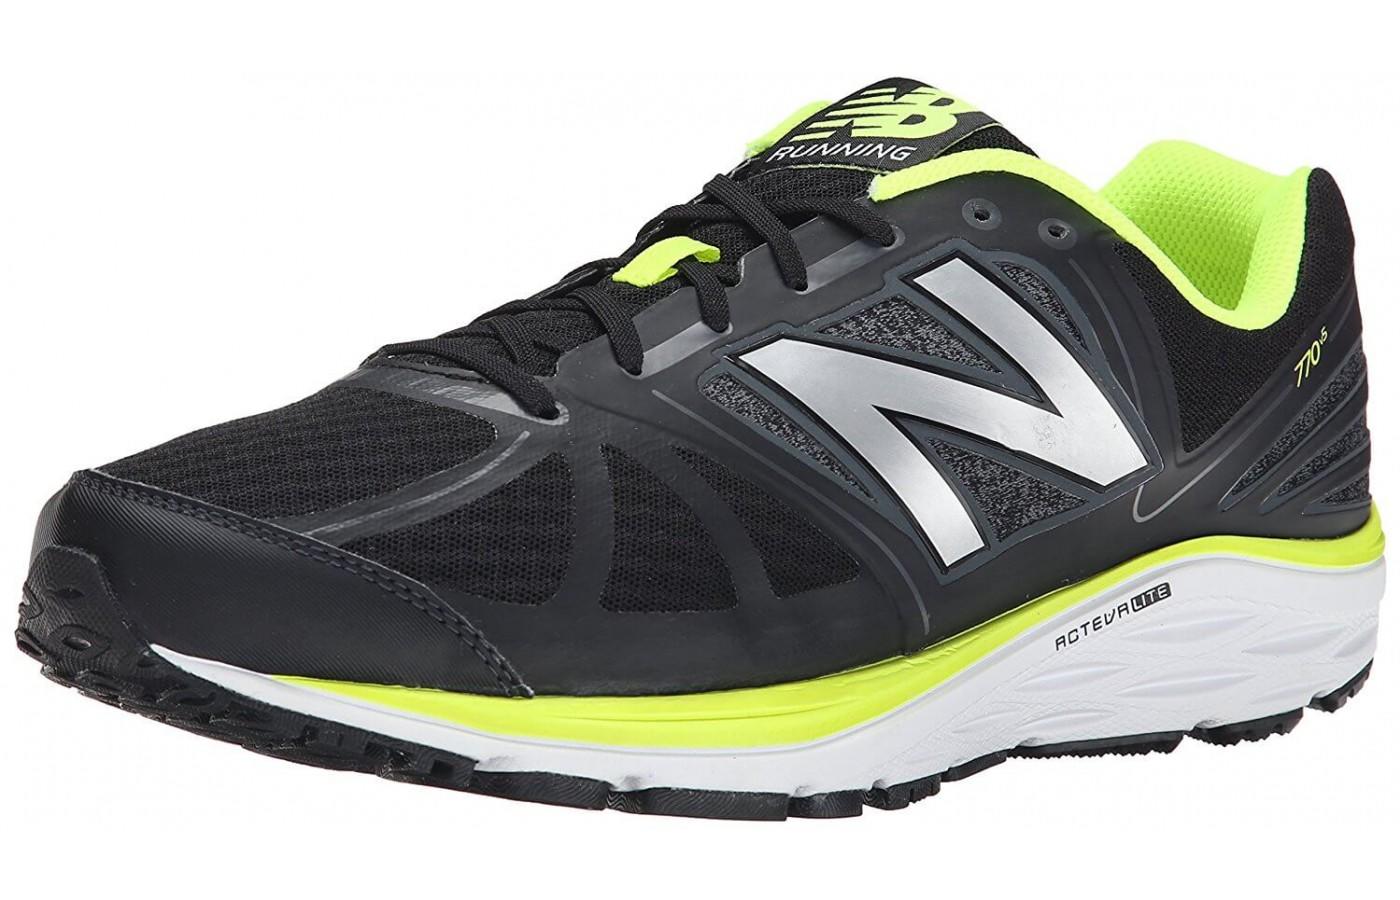 The New Balance 770 v5 reviewed and compared.